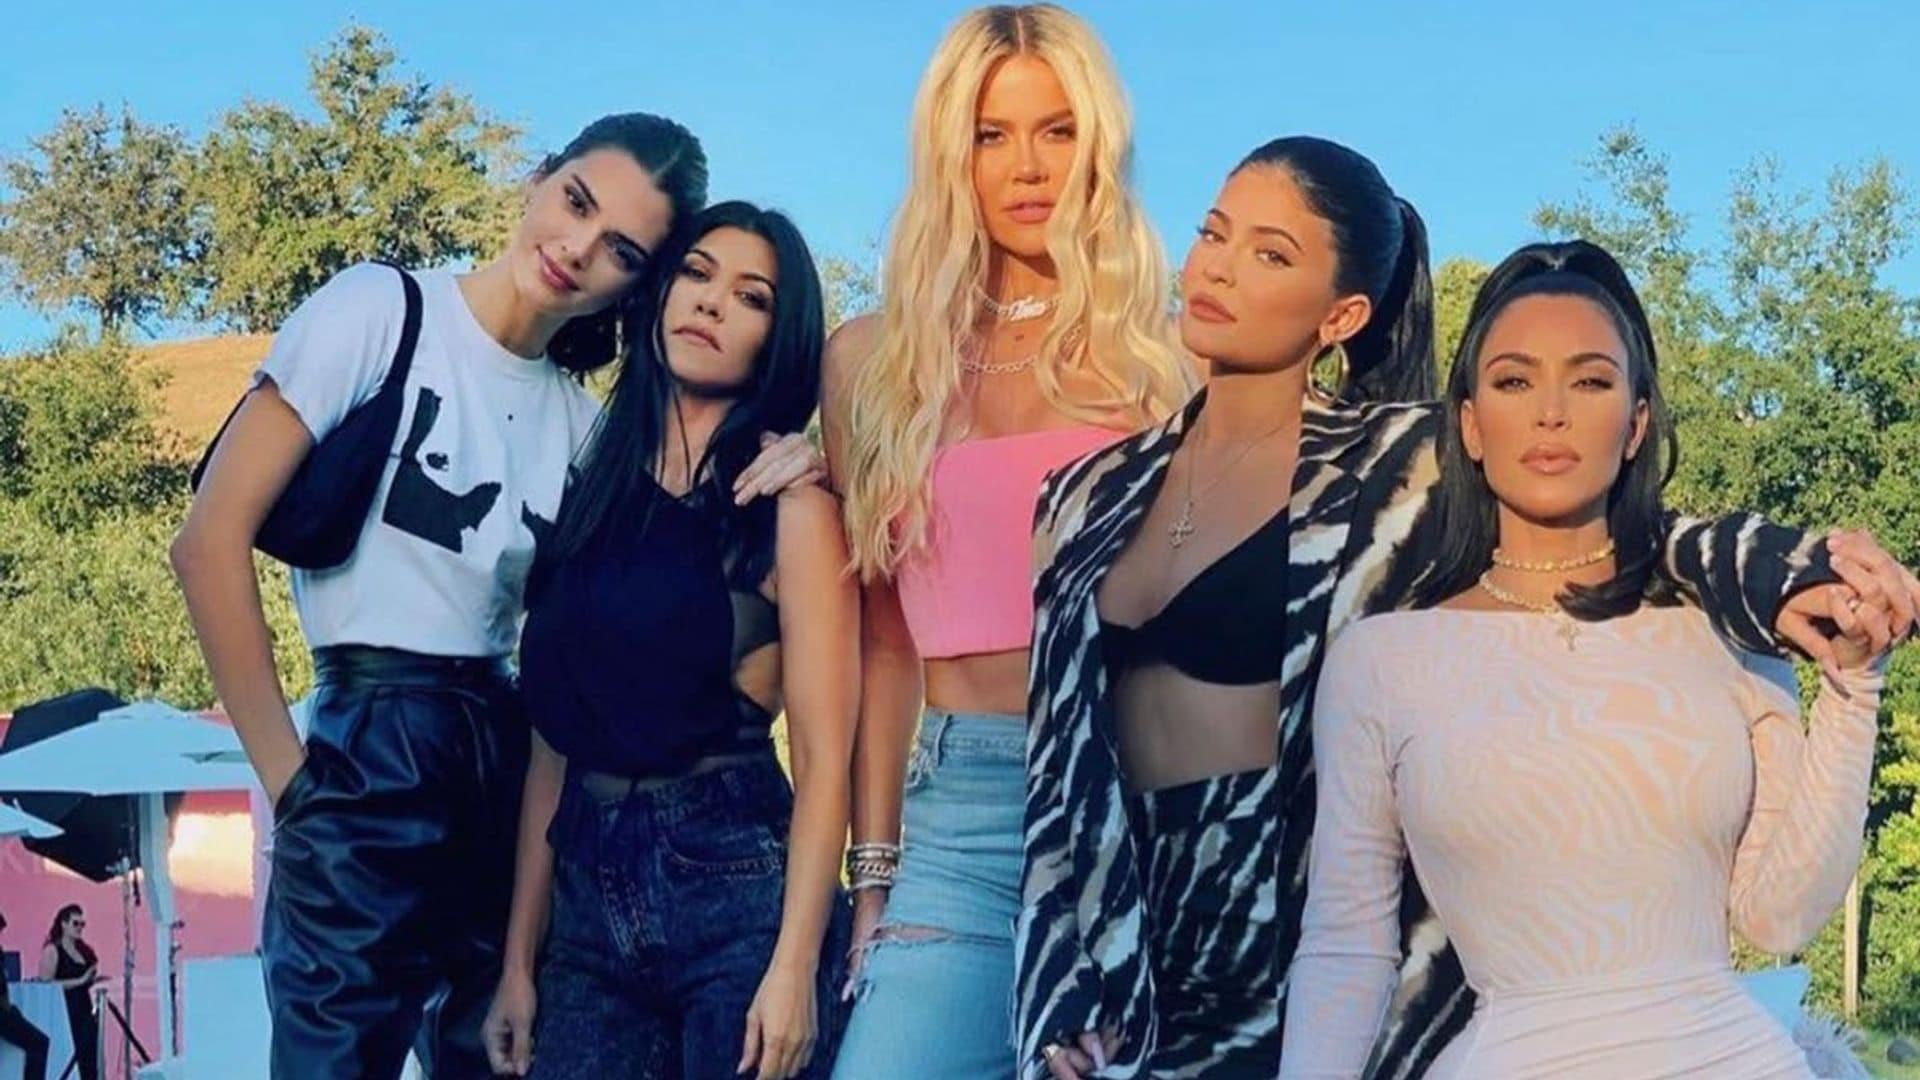 Kourtney Kardashian and Kylie Jenner showed off their bodies wearing the new SKIMS collection